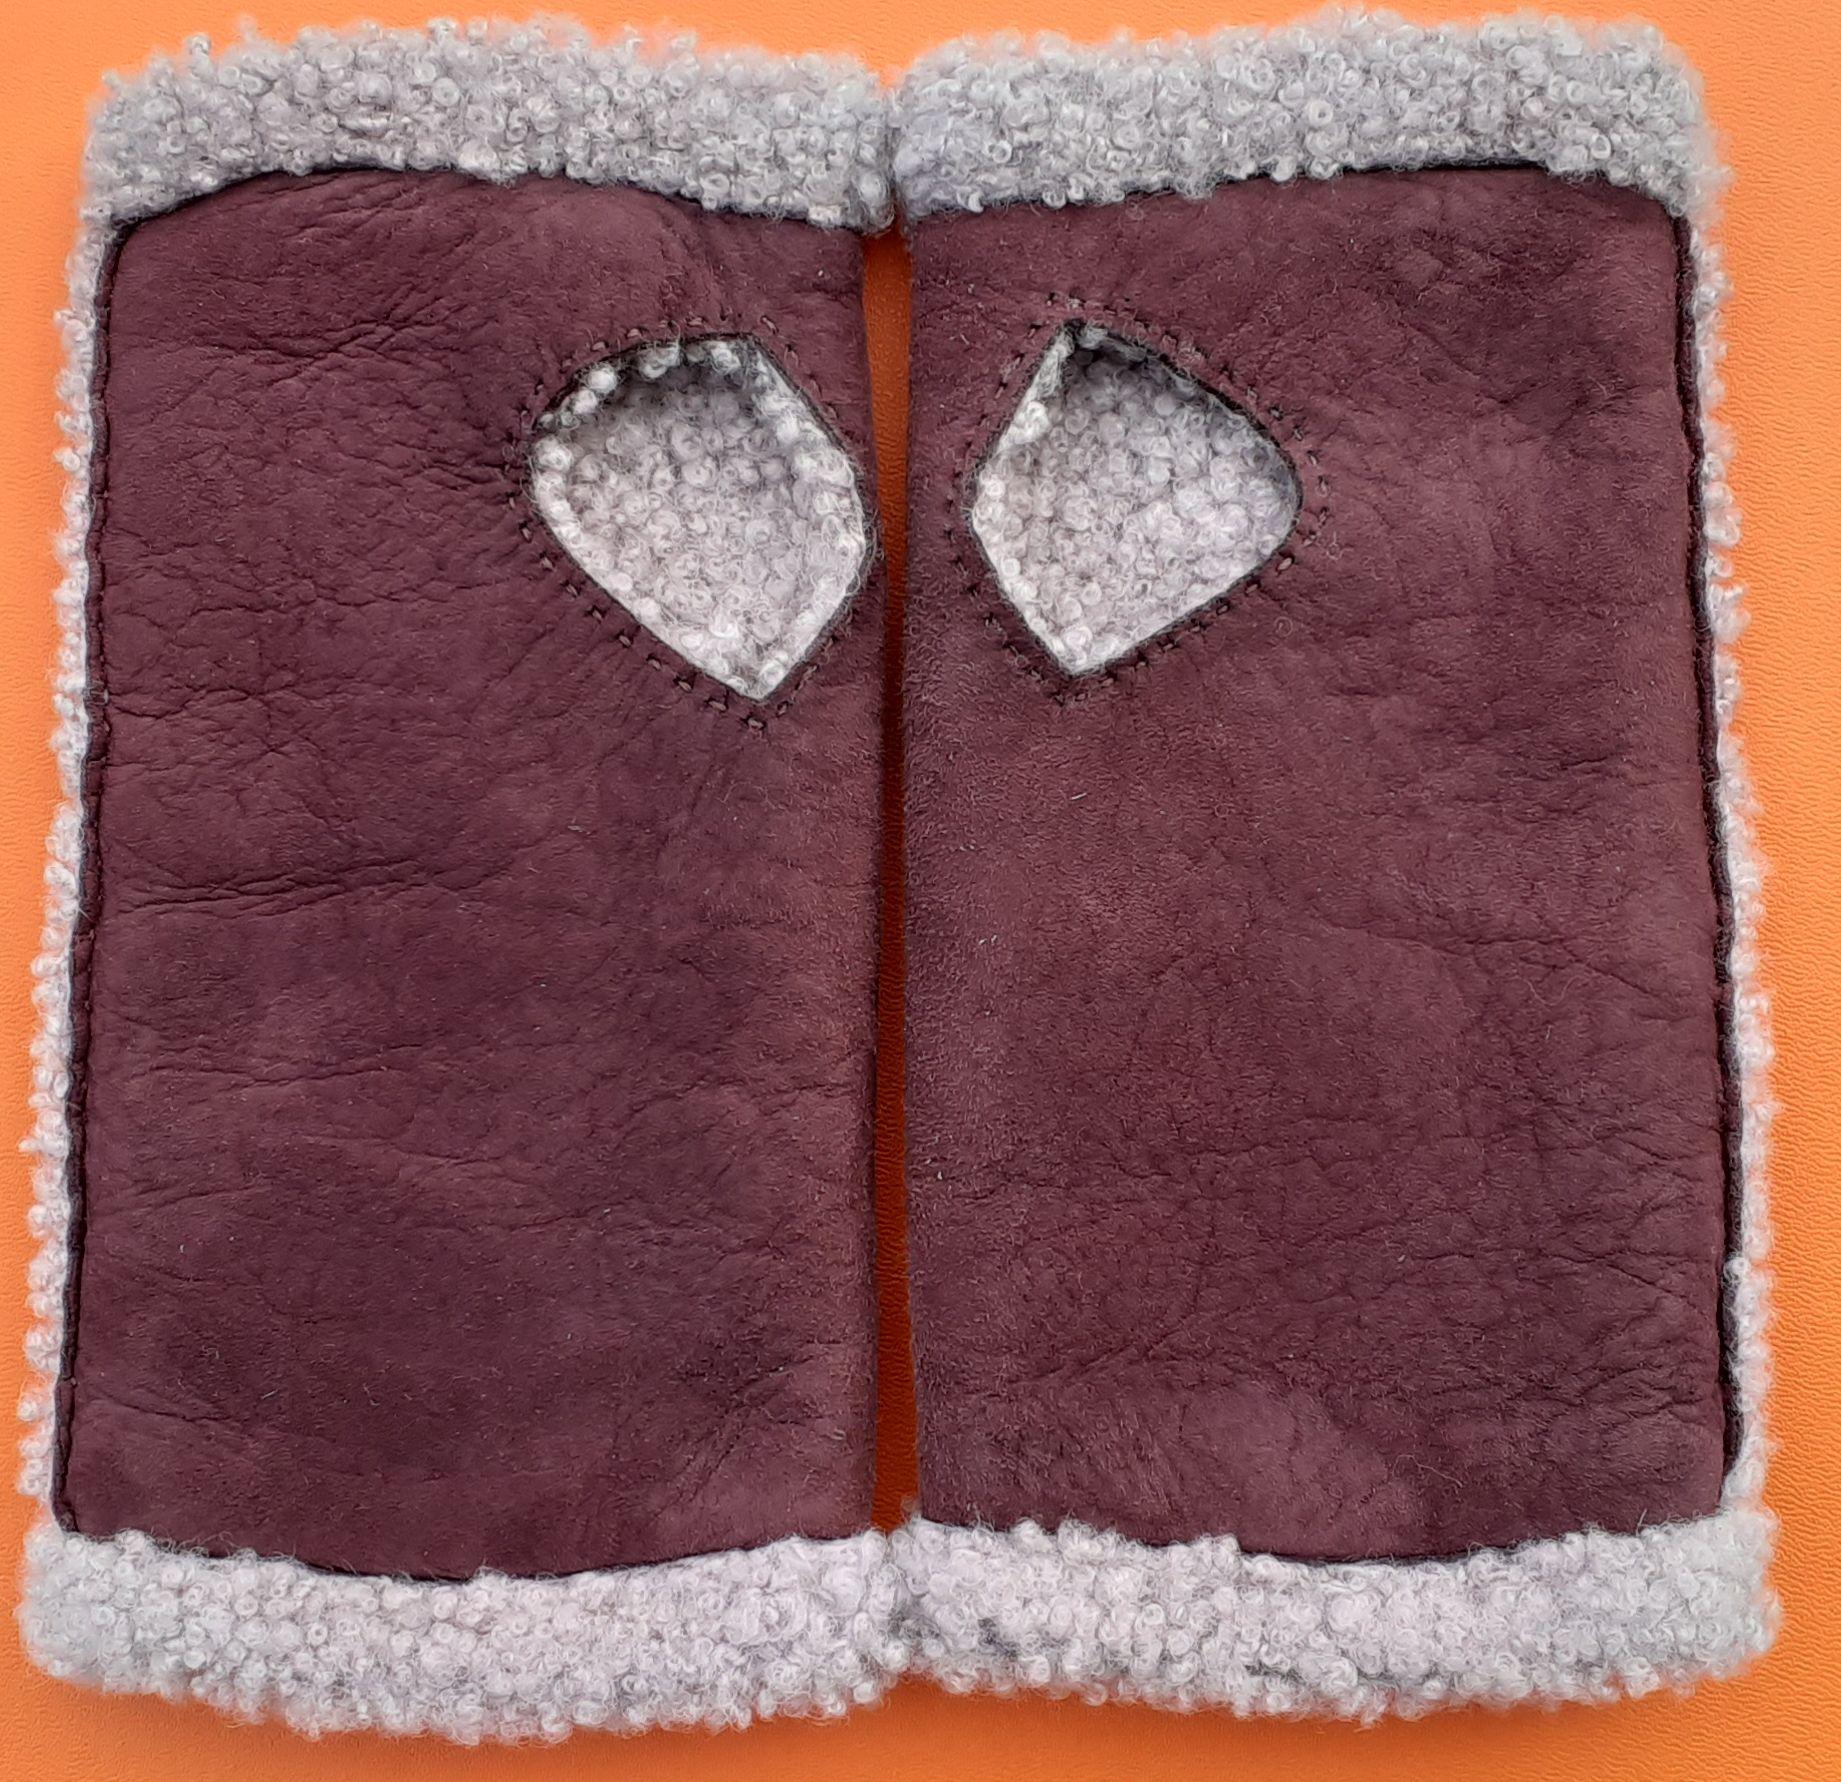 Hermès Open Gloves Mittens Teddy Plush Shearling Leather Wool Purple Size 6.5 For Sale 1